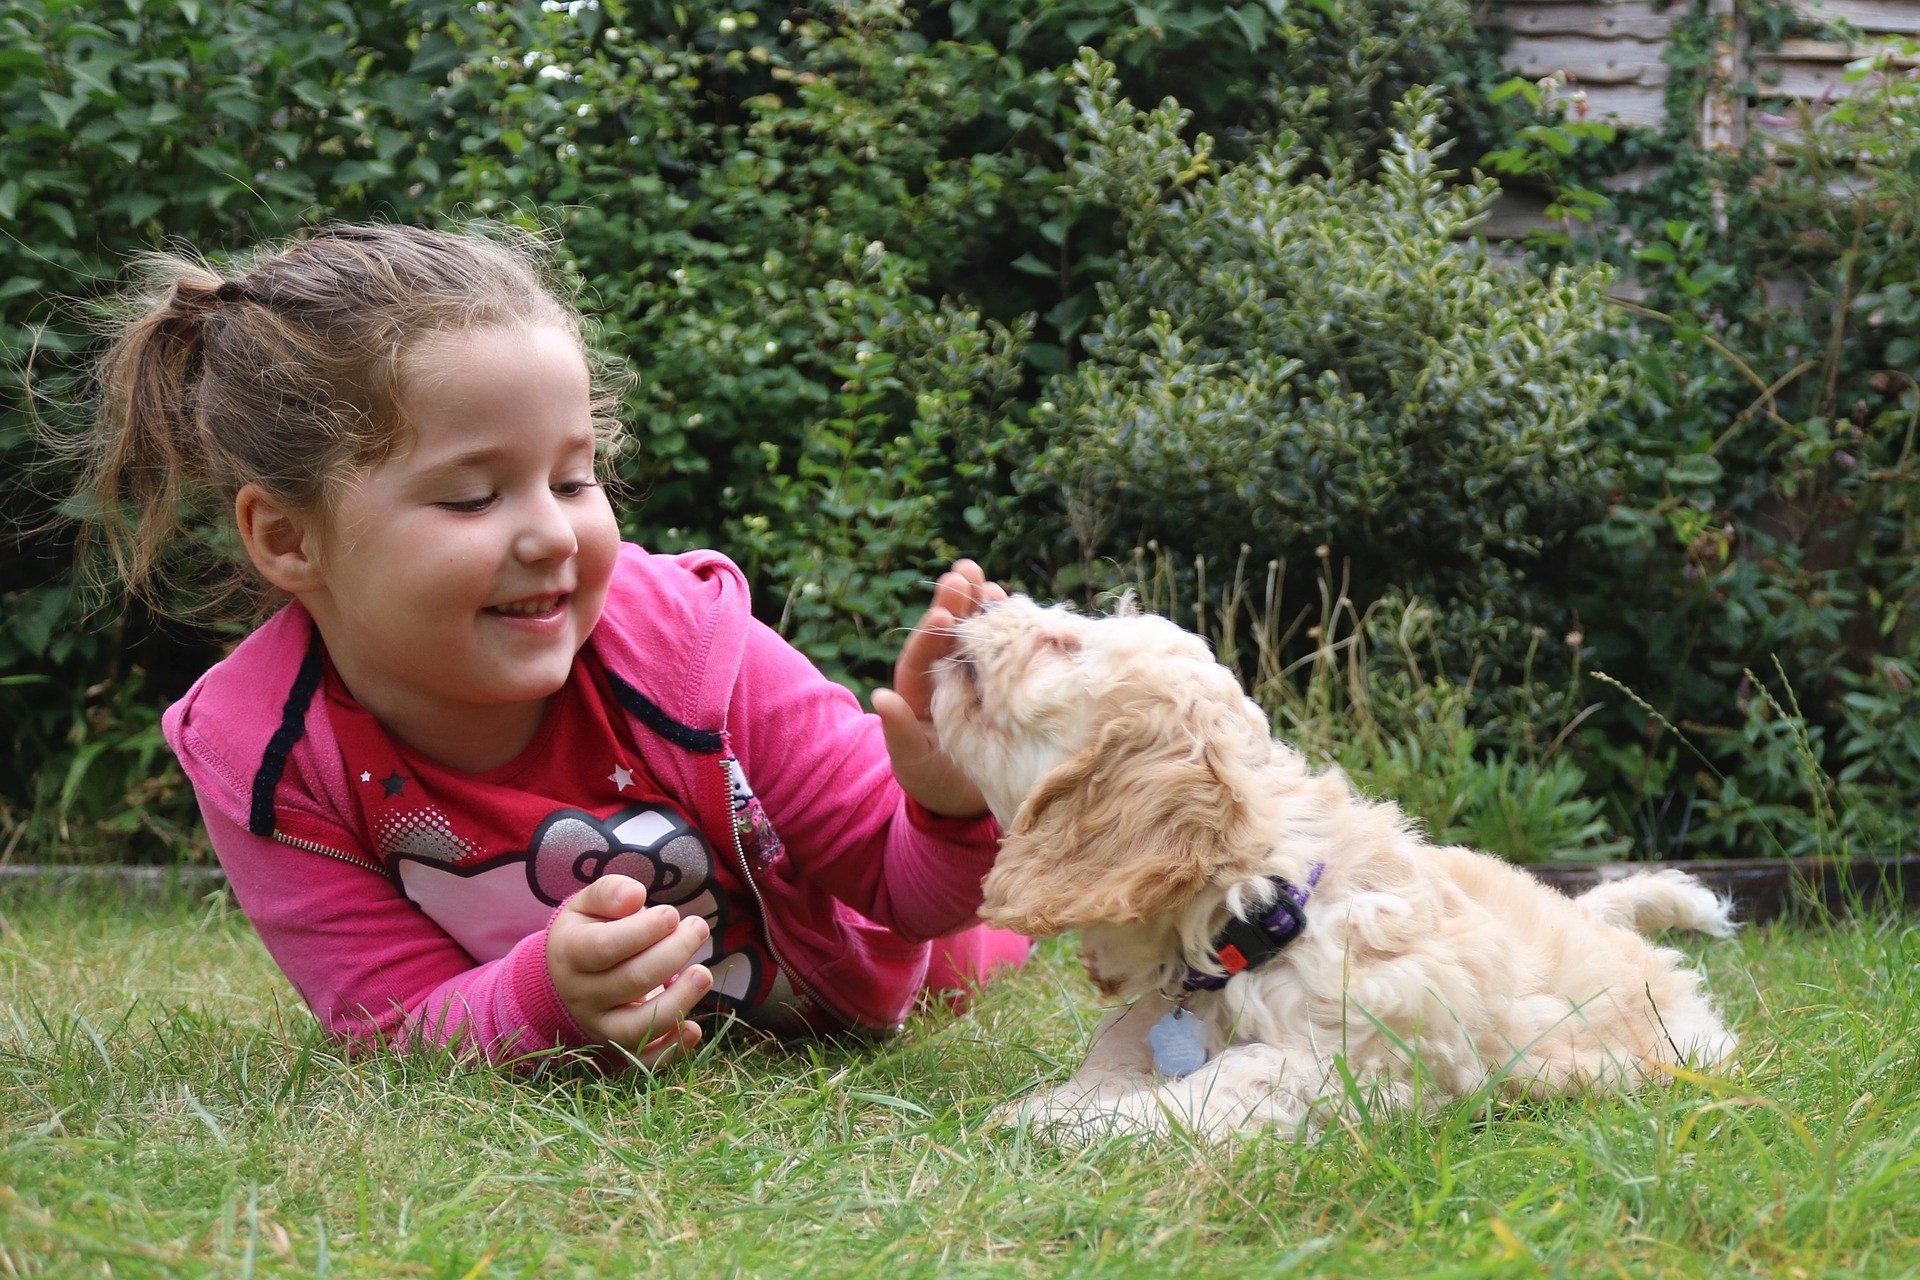 Child playing with a puppy on grass